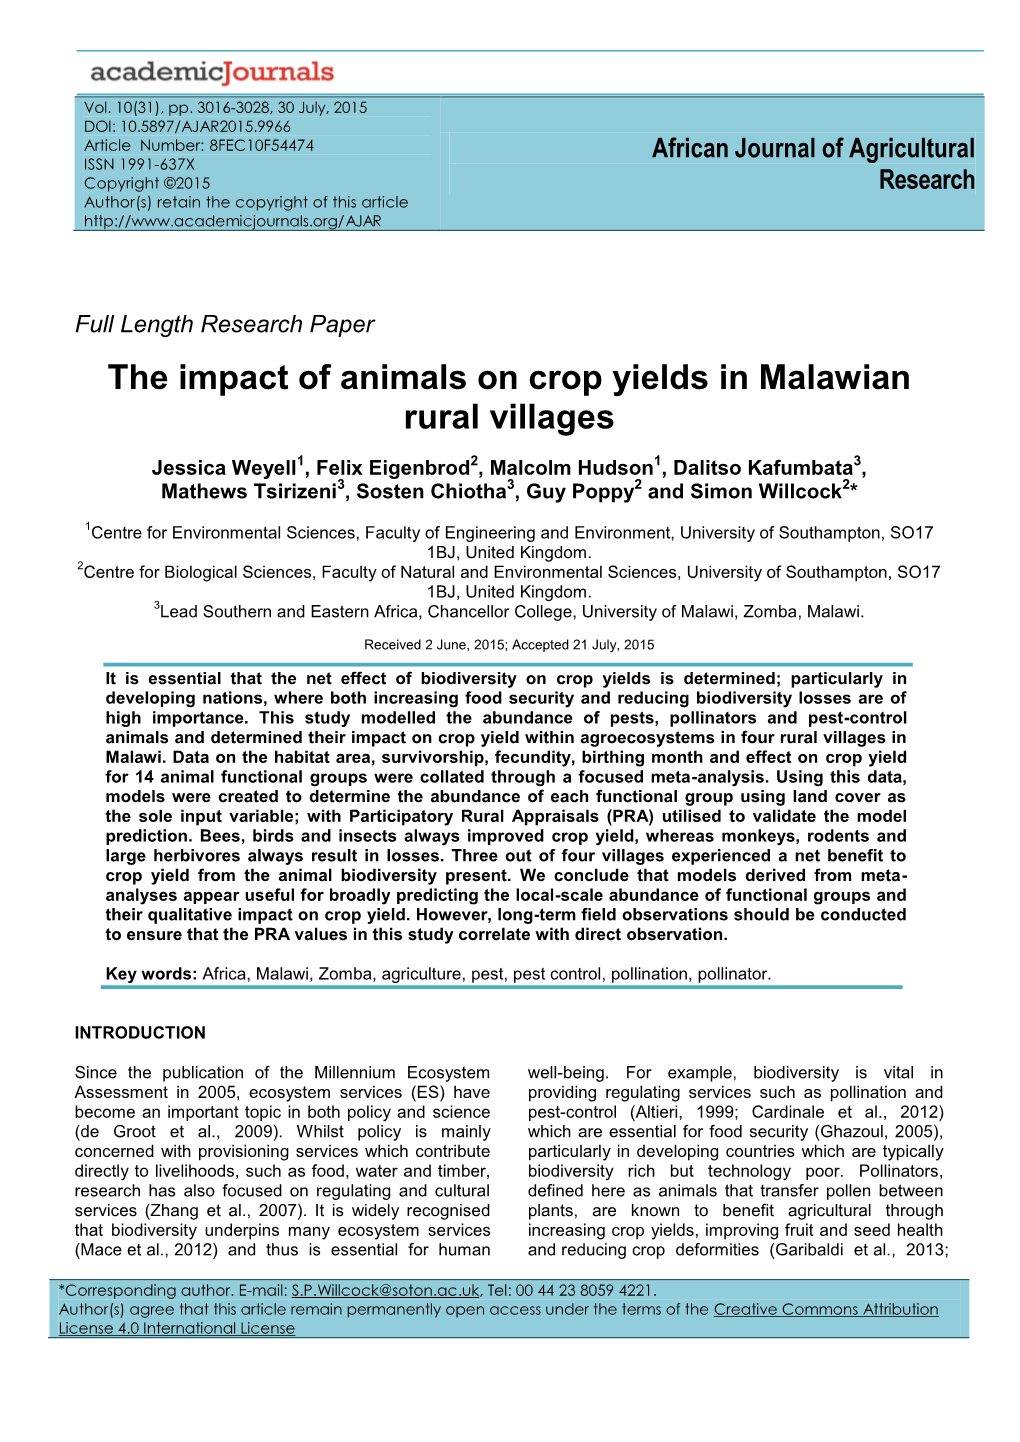 The Impact of Animals on Crop Yields in Malawian Rural Villages